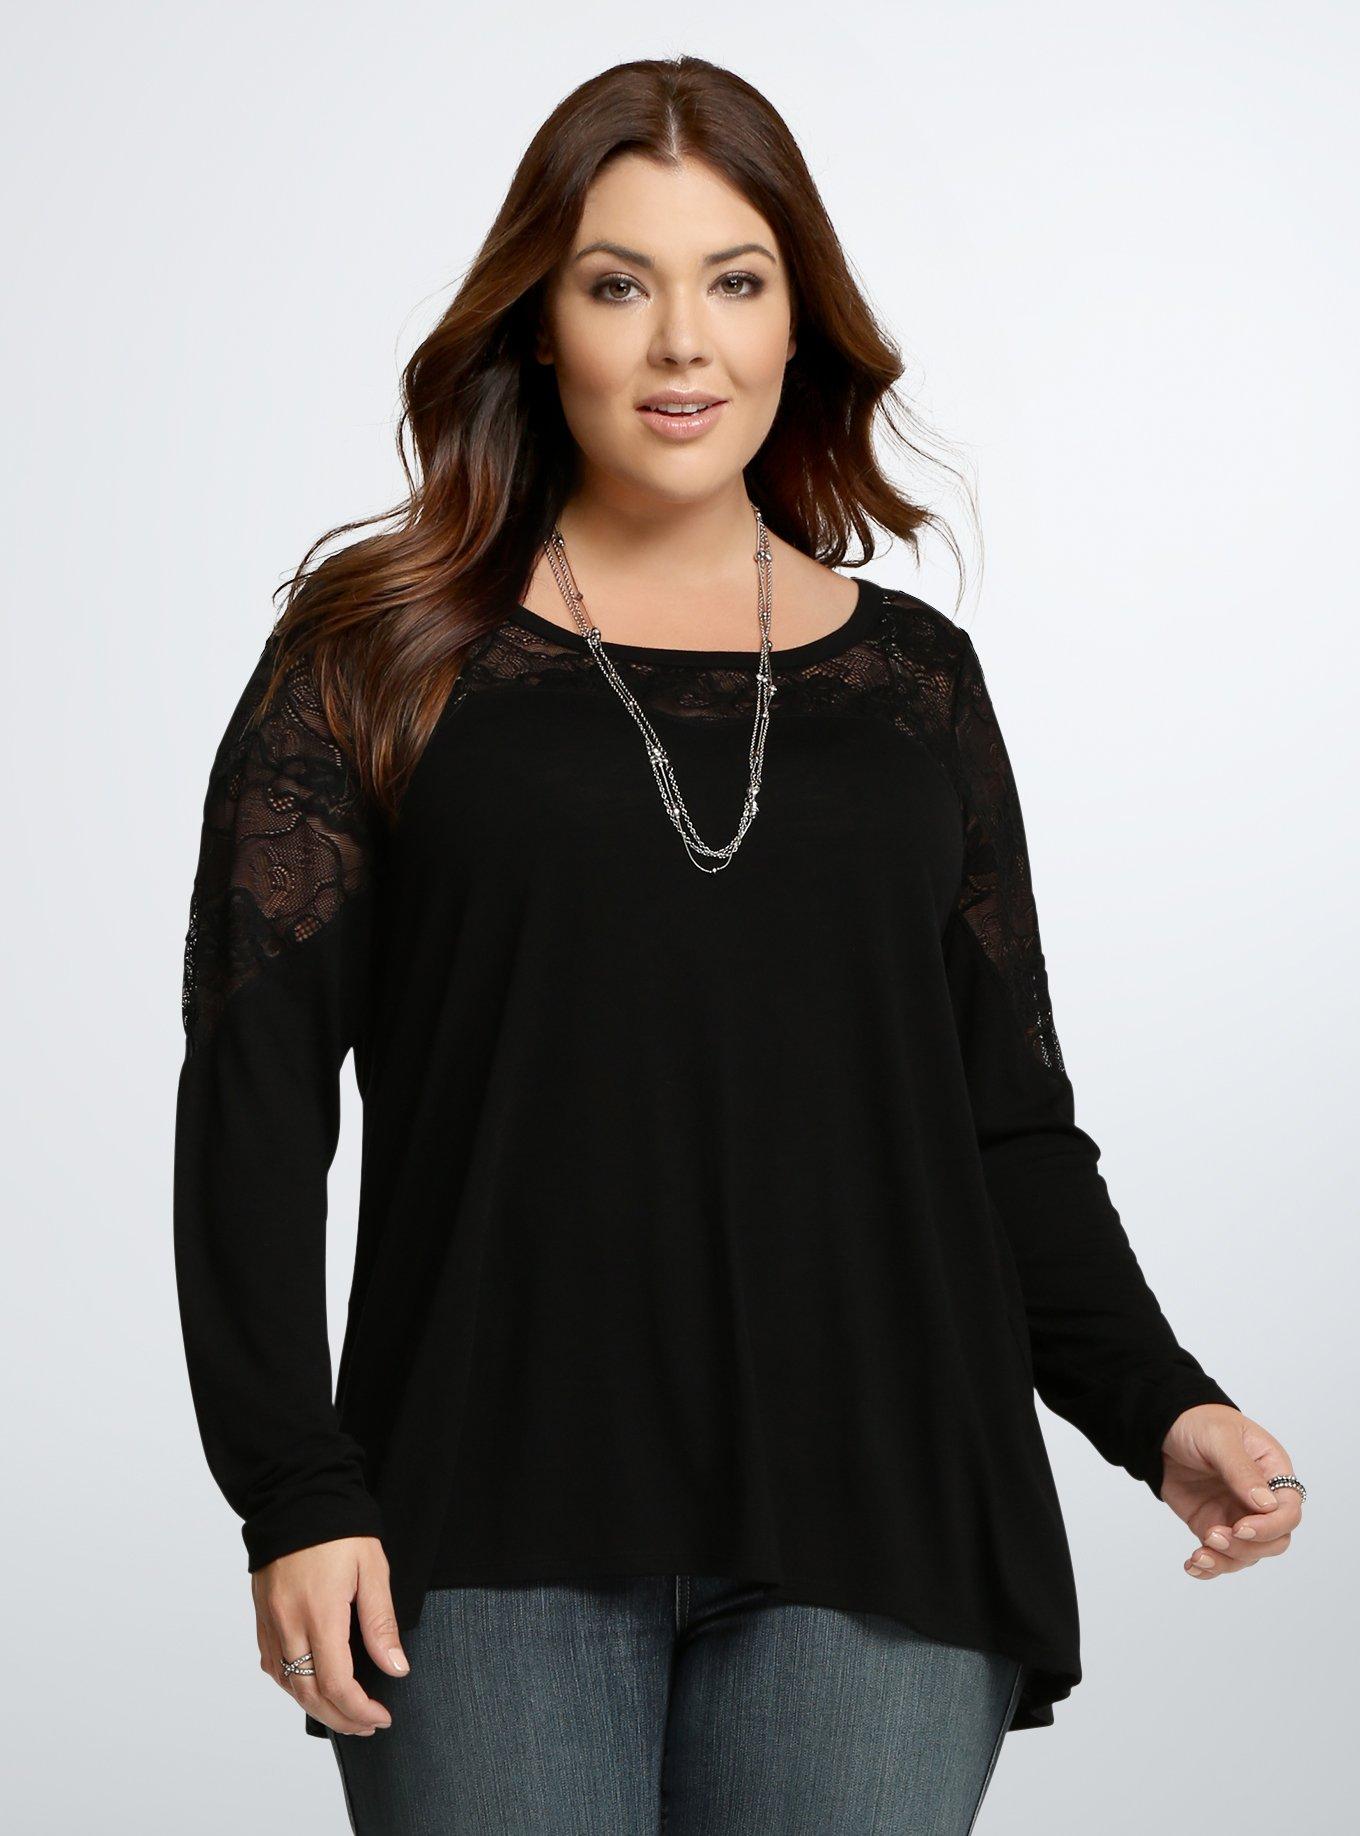 Plus Size - Embroidered Lace Illusion Top - Torrid